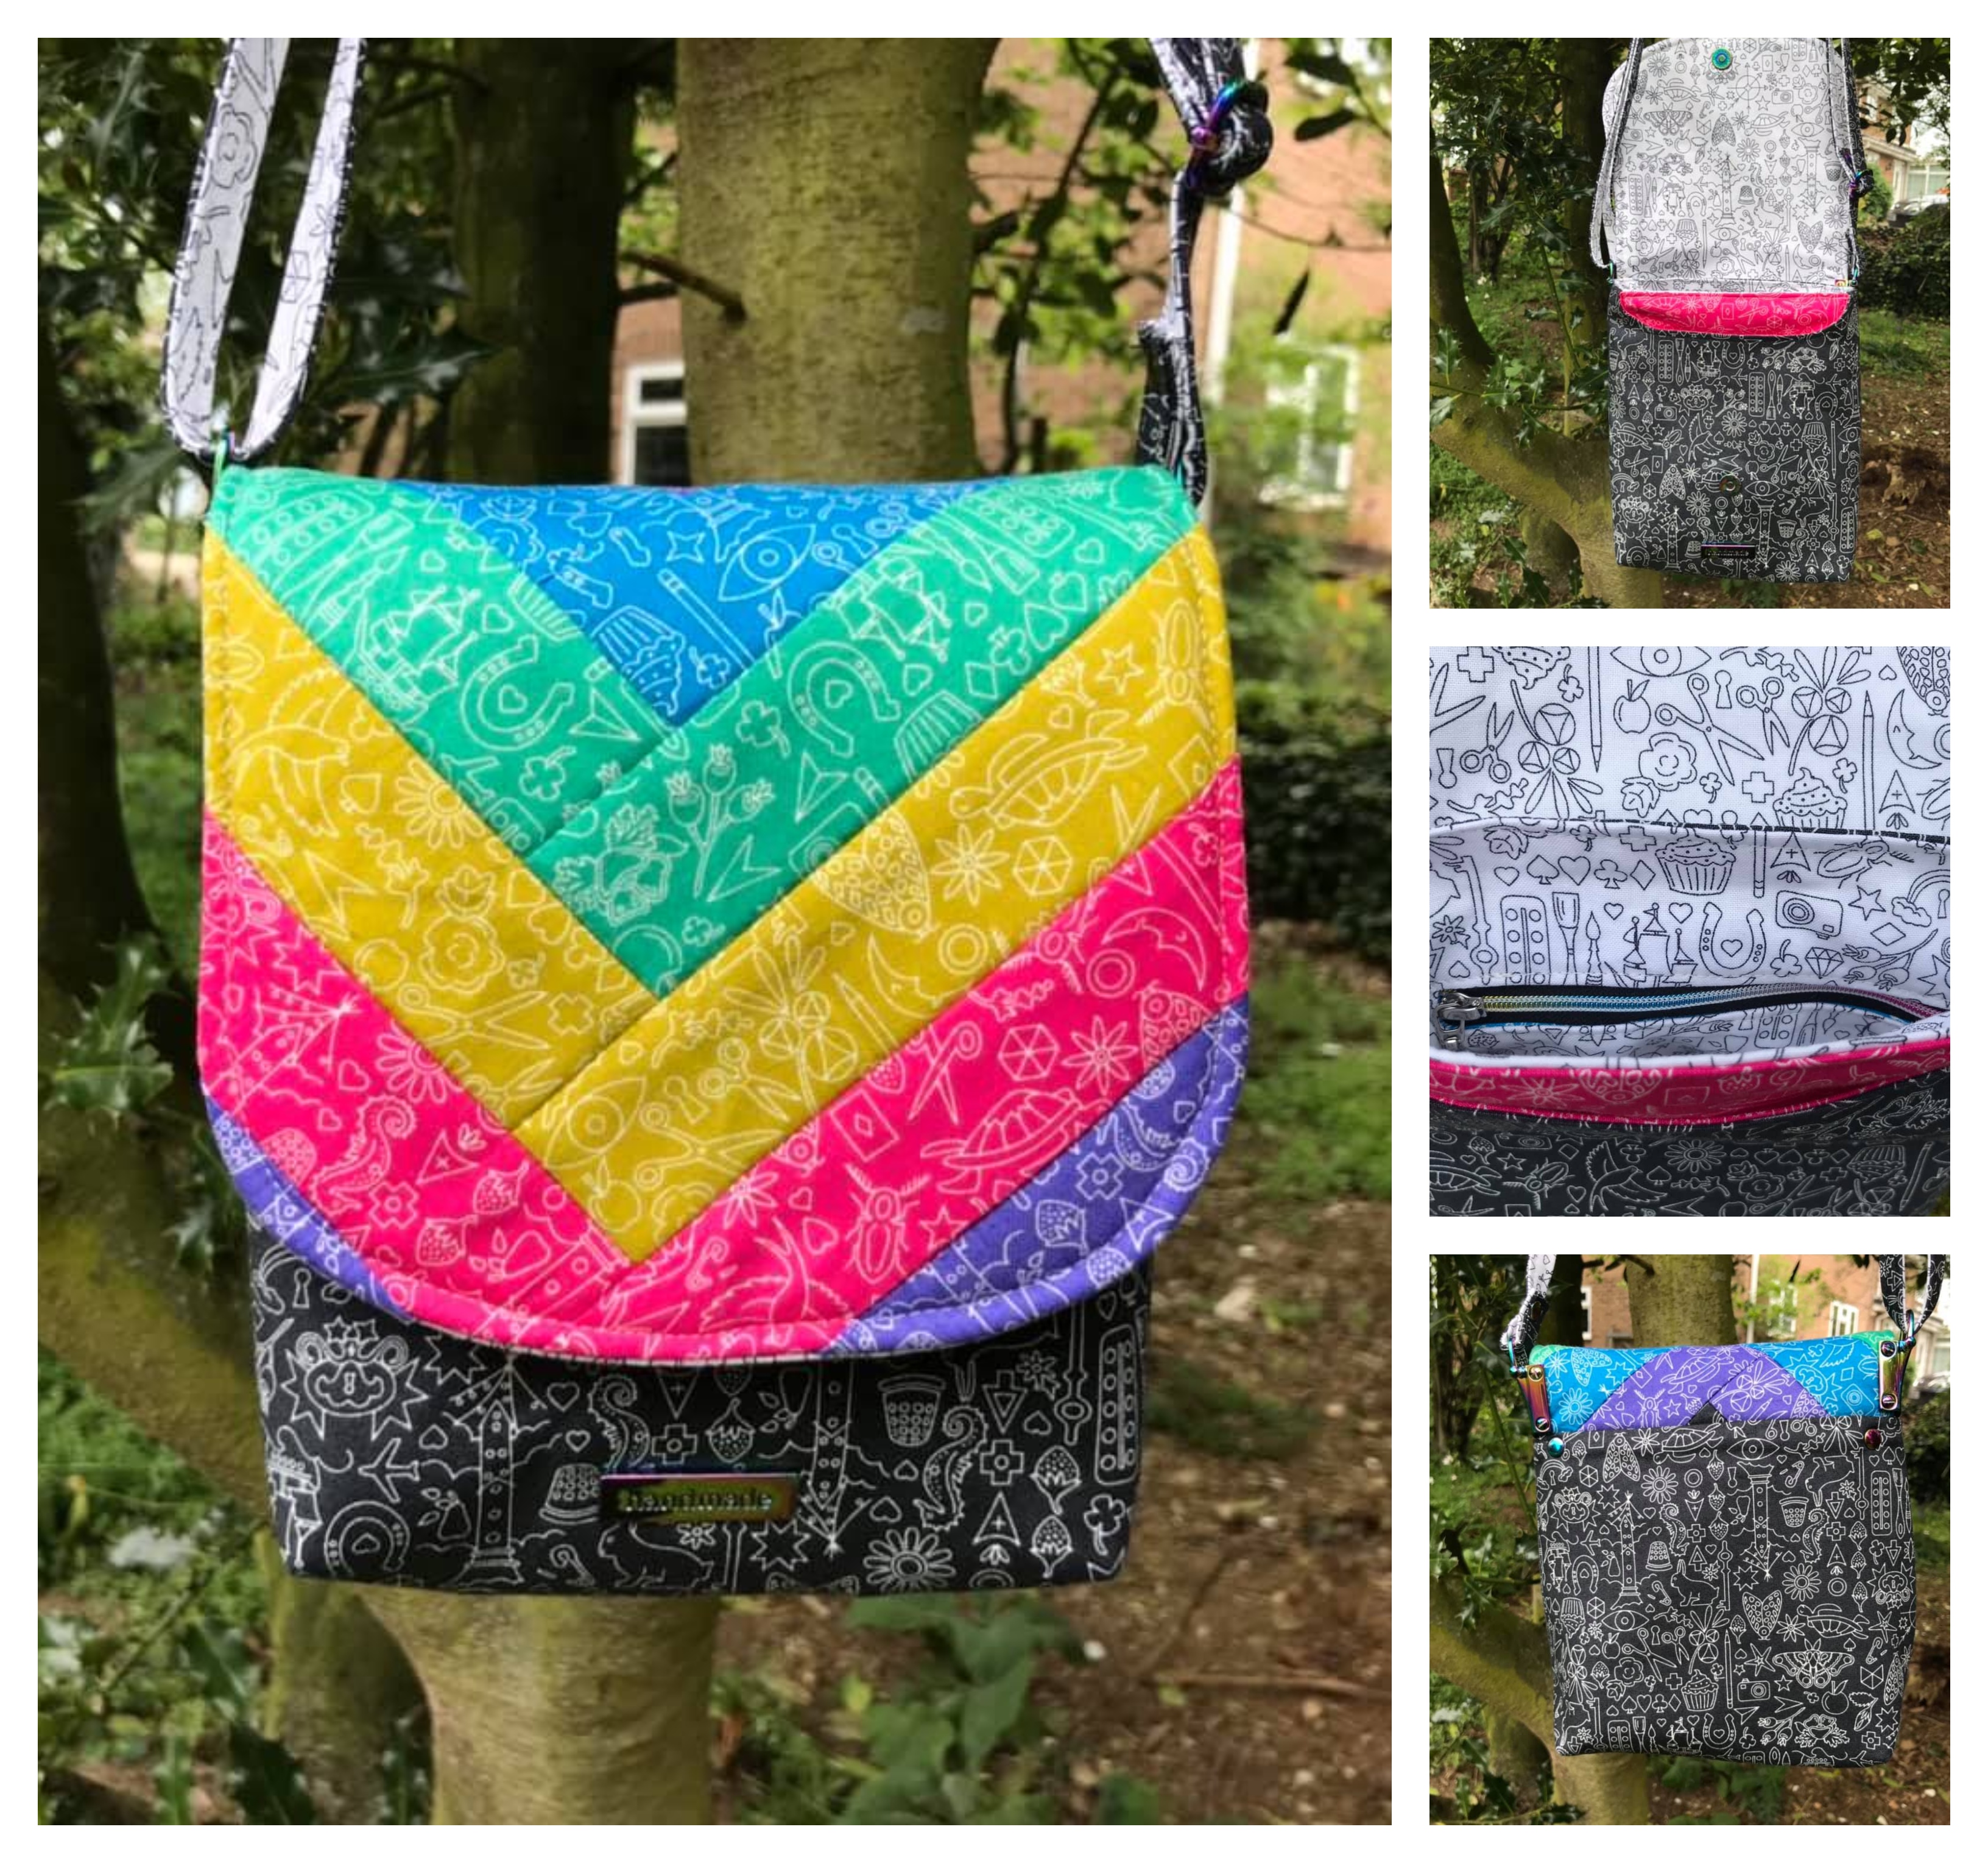 The Crossbody Bag by Sewing Patterns by Mrs H, made by Rebecca Sumnall